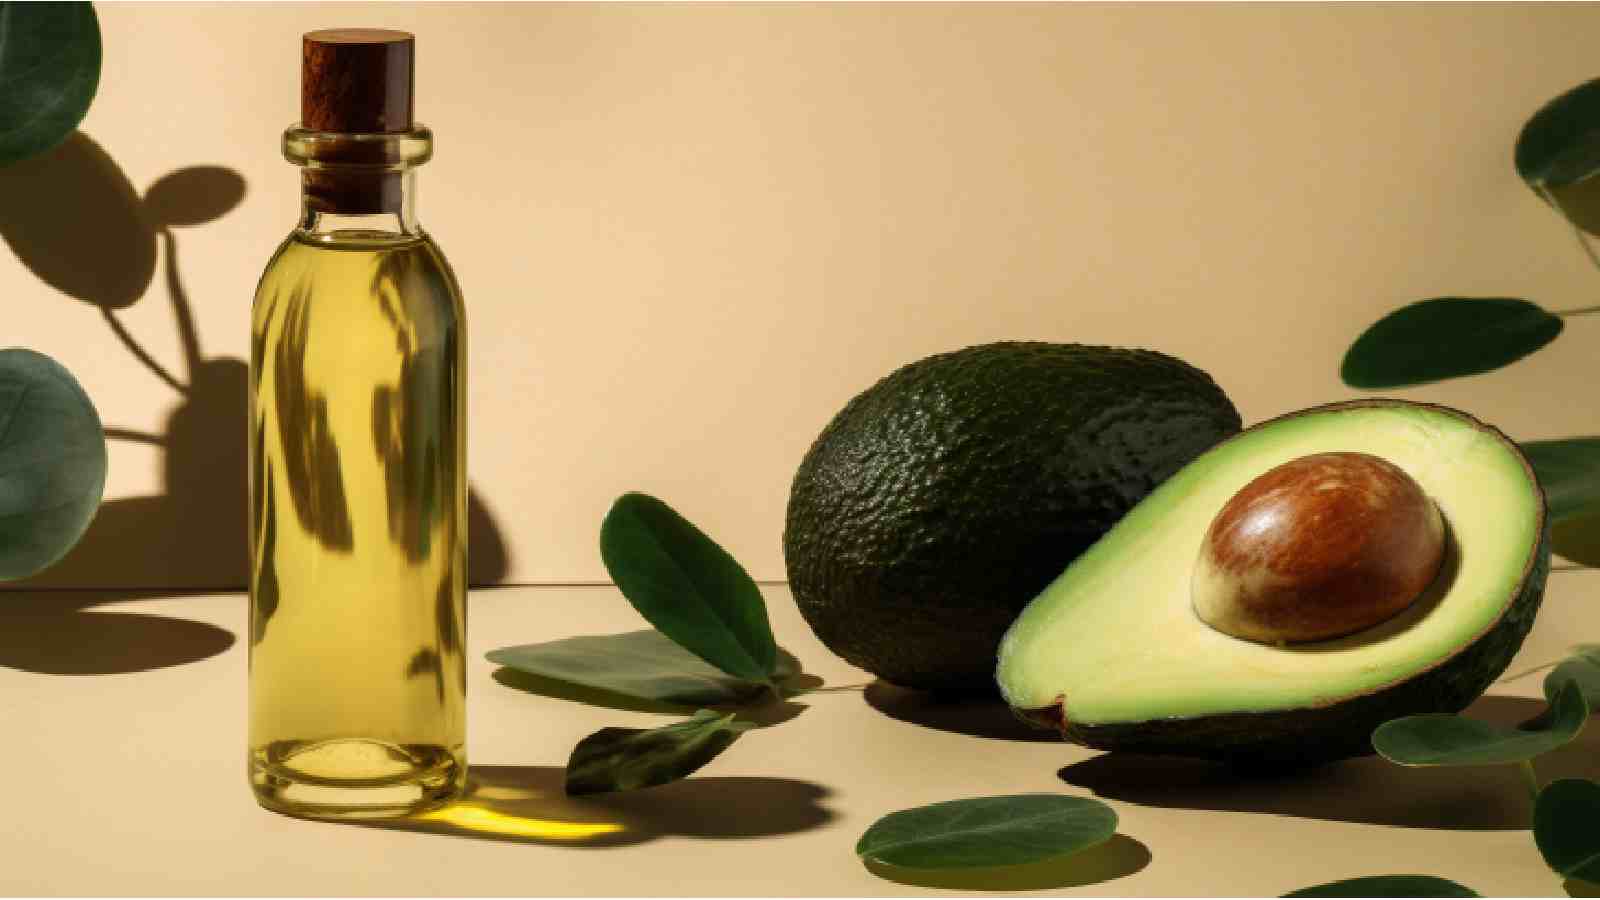 Beauty benefits of avocado oil: A natural remedy for dry skin and hair